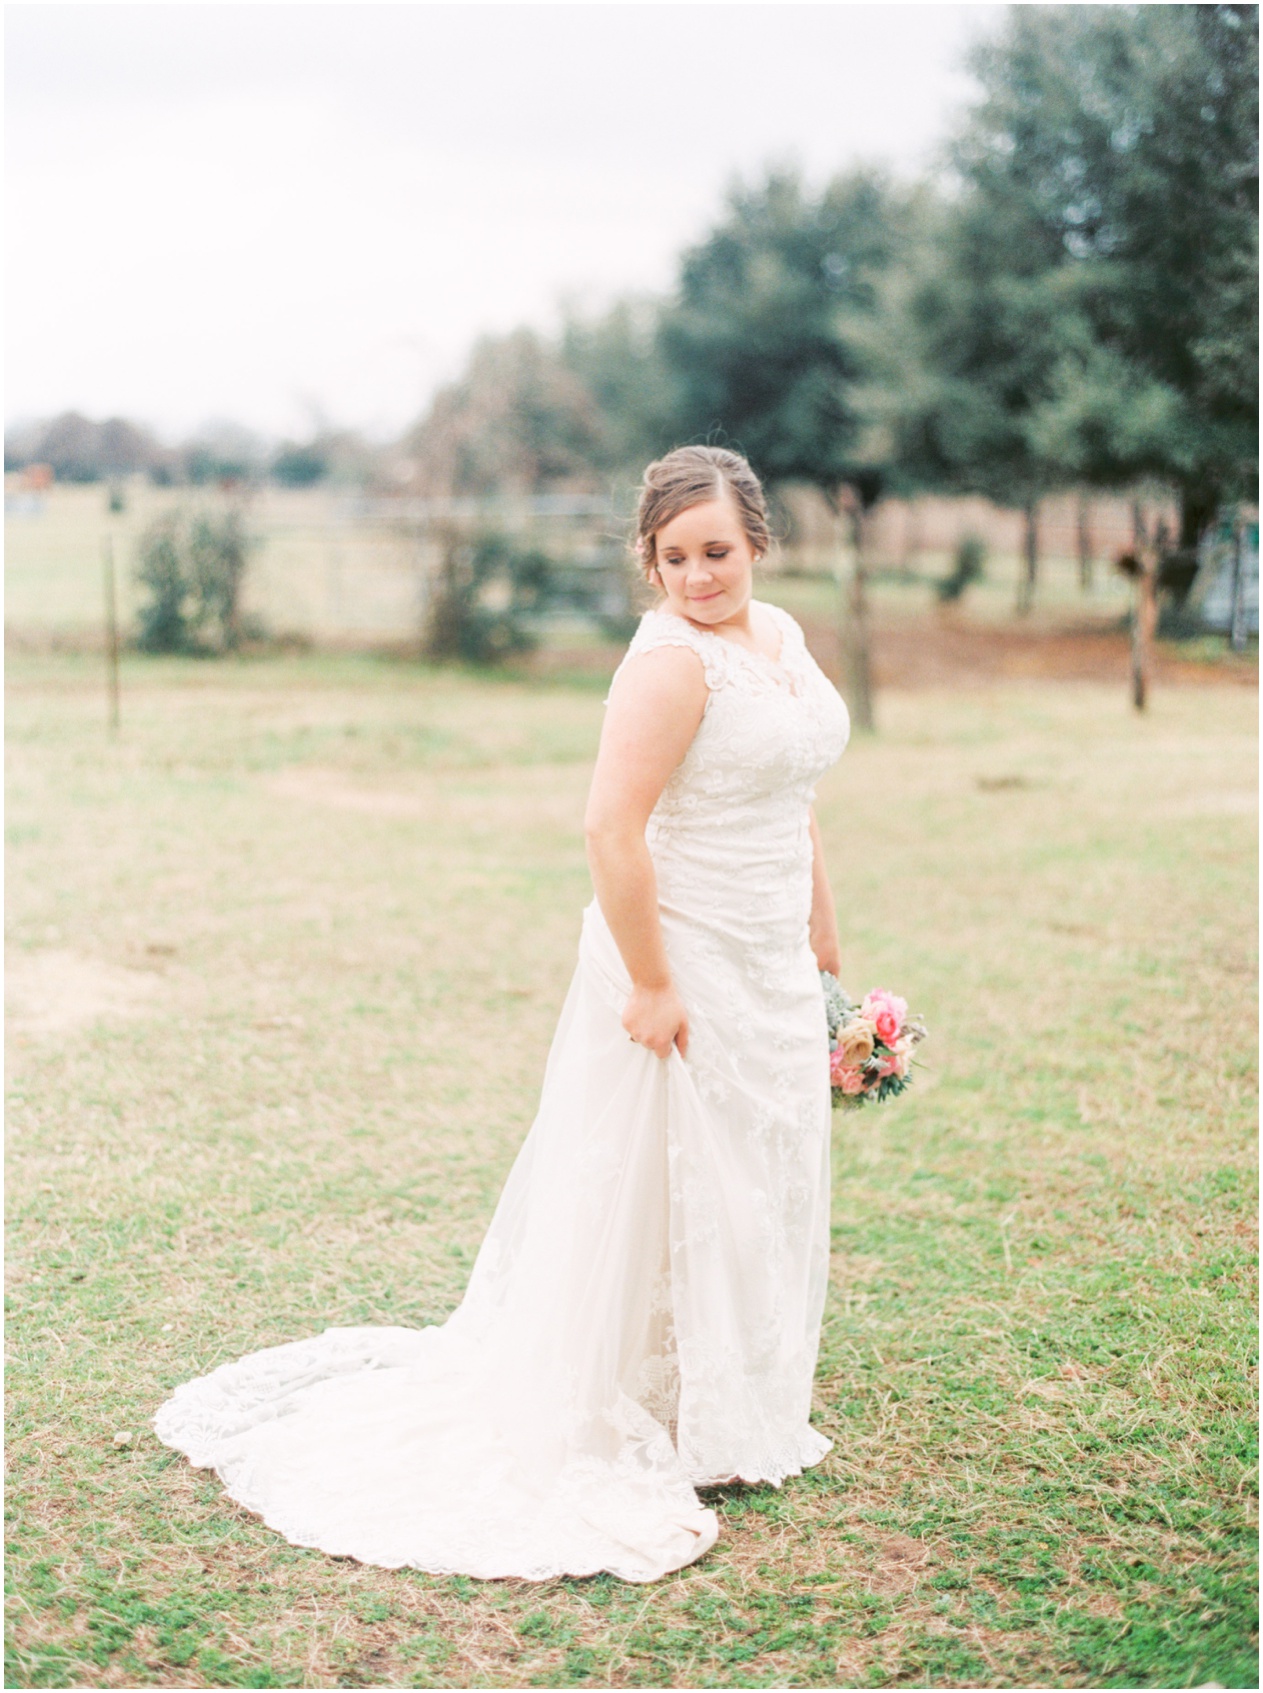 Sarah Best Photography - Claire's Bridals - The Amish Barn at Edge-15_STP.jpg